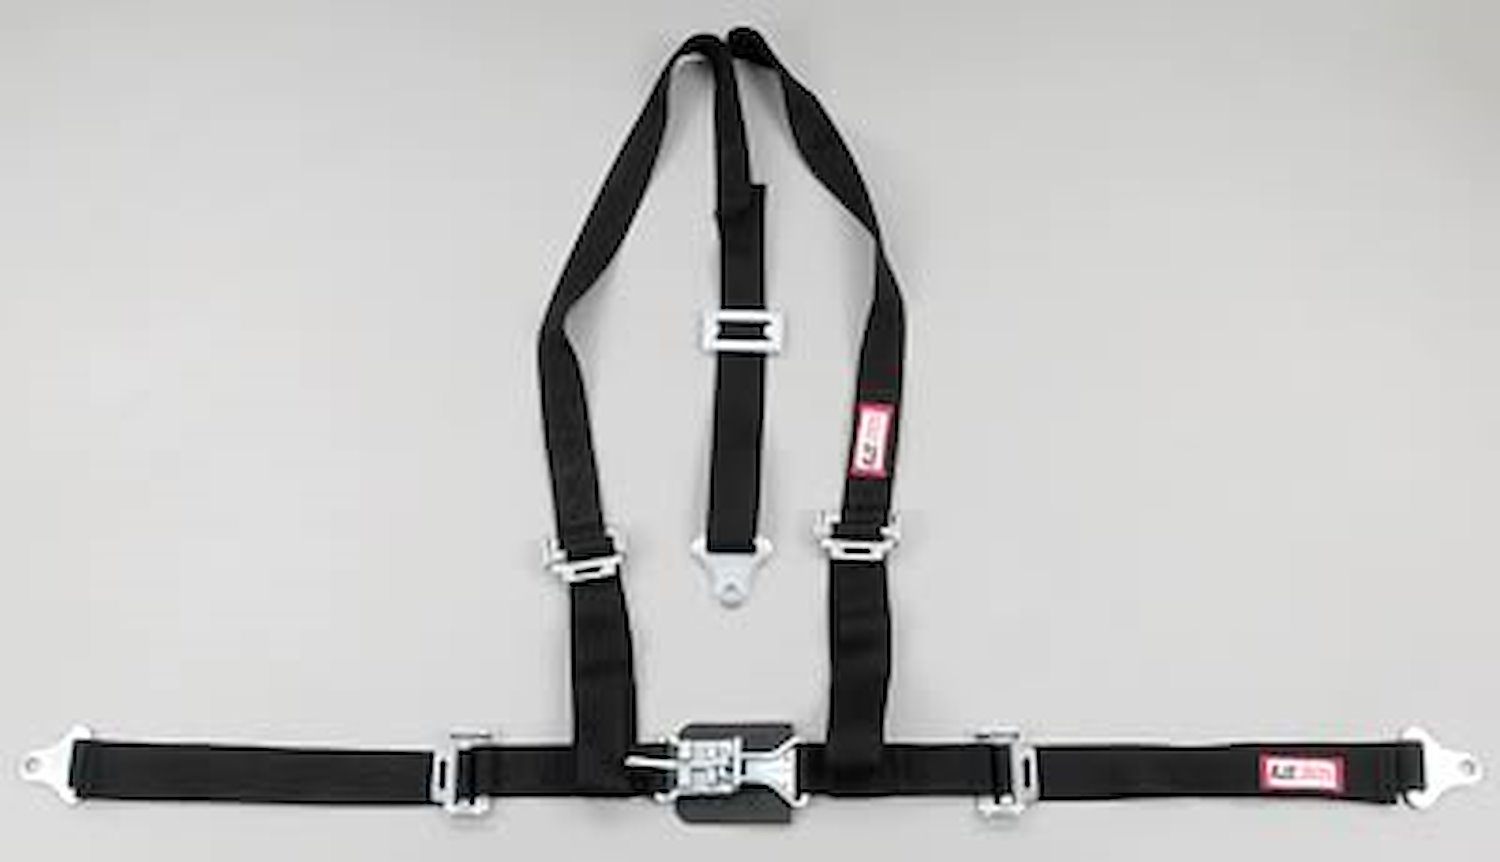 NON-SFI L&L HARNESS 2 PULL UP Lap Belt SNAP SEWN IN 2 S.H. INDIVIDUAL FLOOR Mount WRAP/SNAP KHAKI